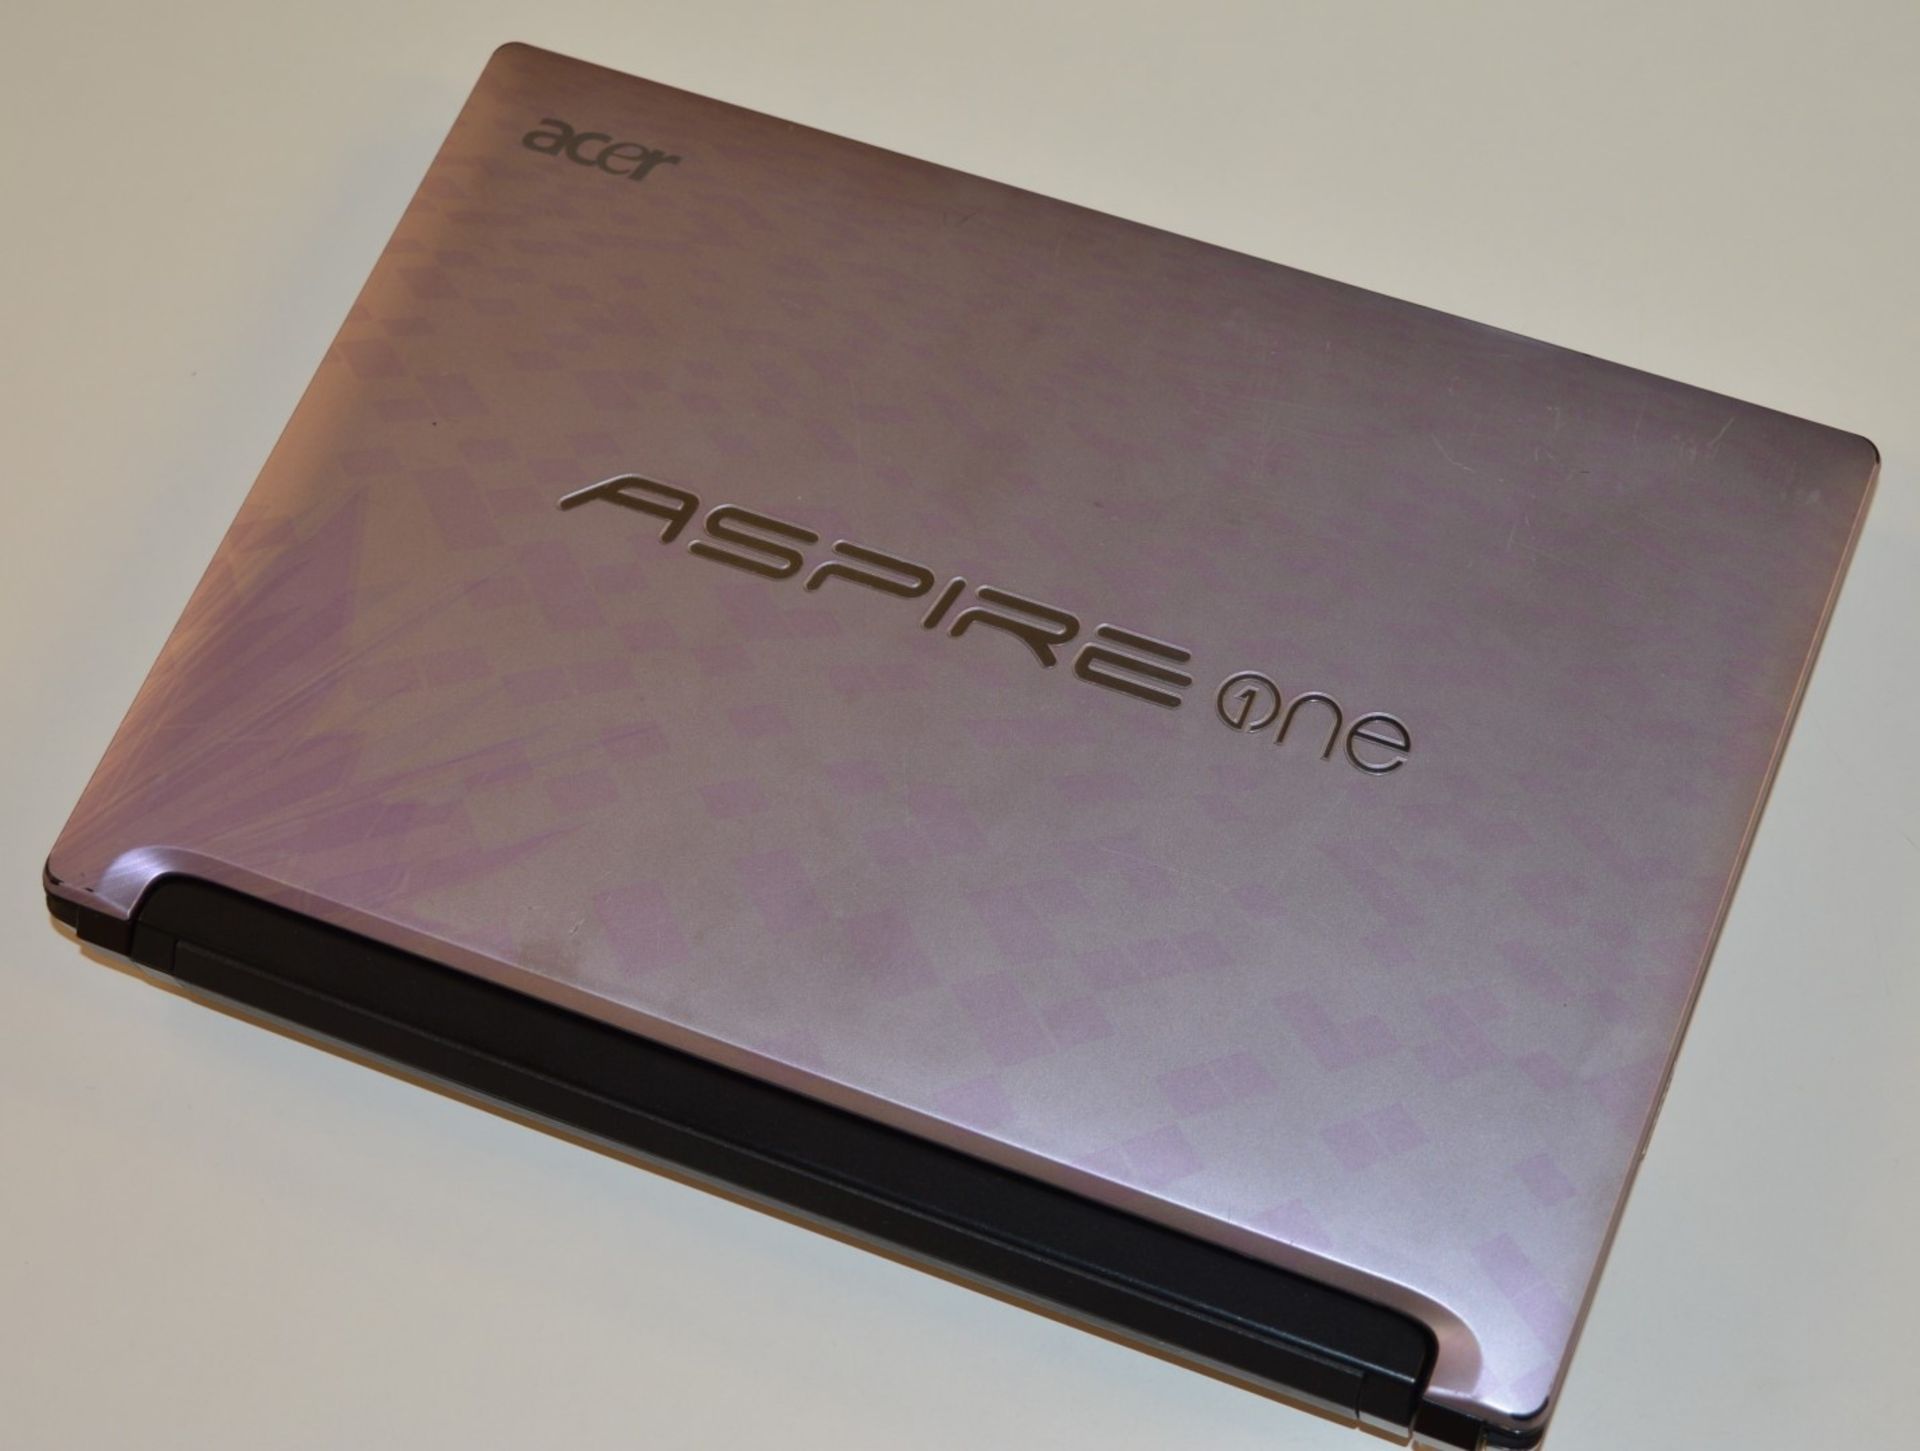 1 x Acer Aspire One Netbook Computer - Features 10 Inch Screen, 250gb Hard Drive, 1gb Ram, Intel 1. - Image 9 of 13